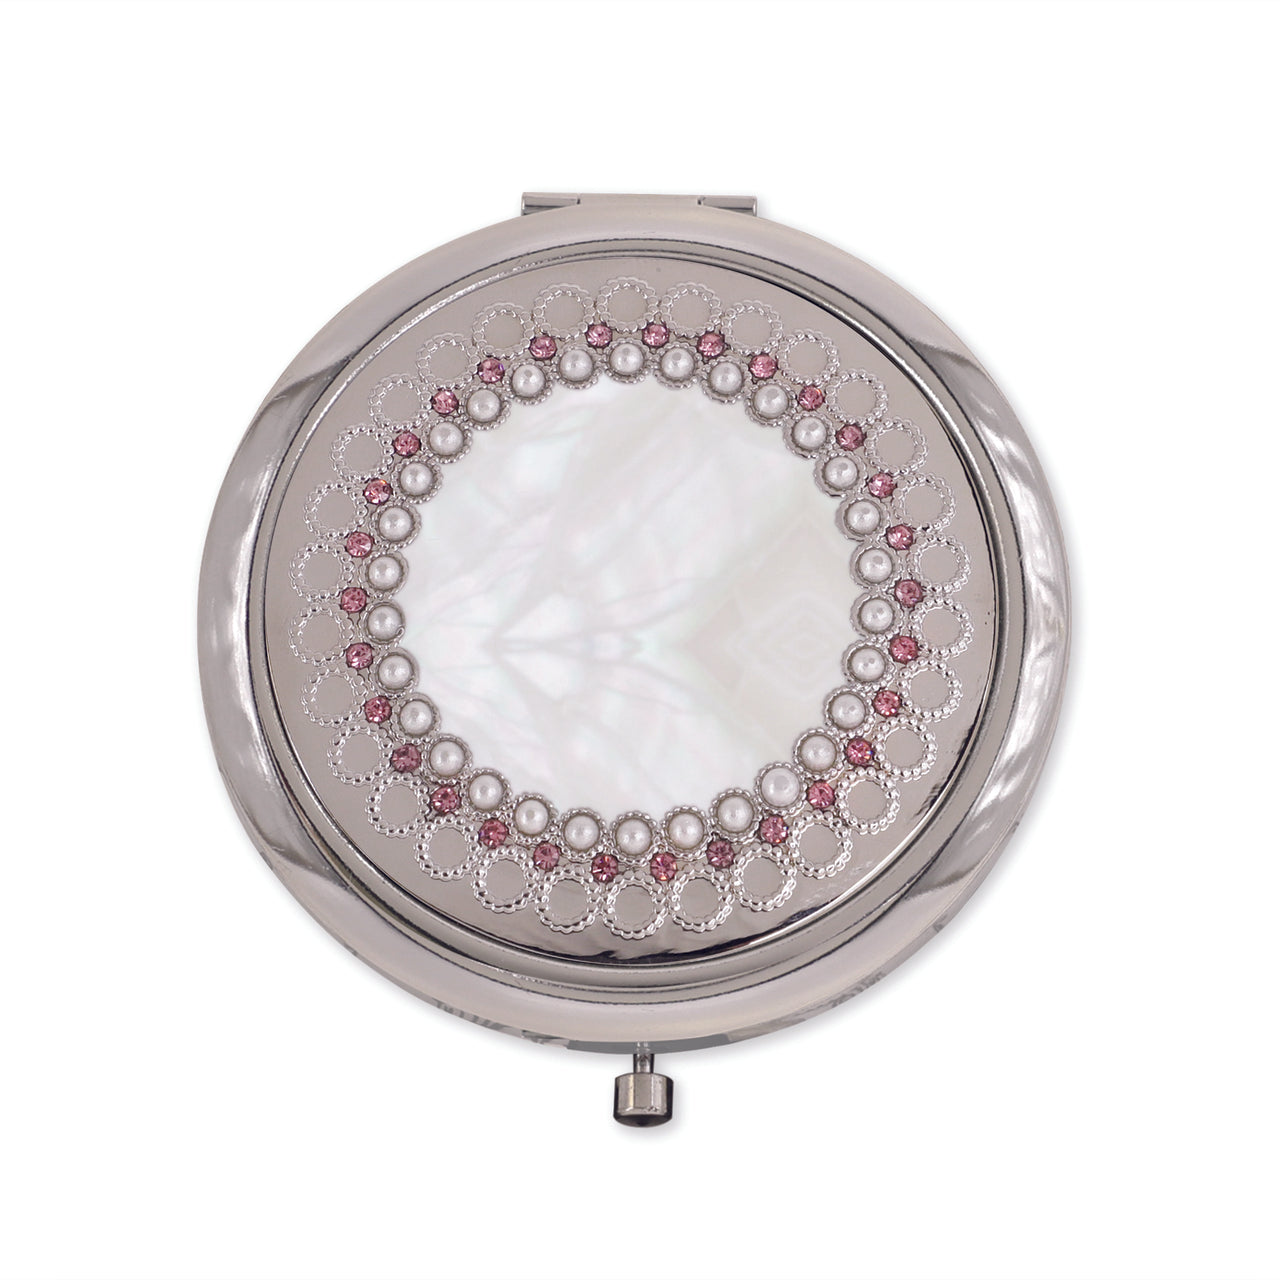 Tipperary Crystal Vintage Pearl Compact Mirror  Vintage Pearl Compact Mirror  TC Compact Mirror Vintage Pearl - NEW 2021